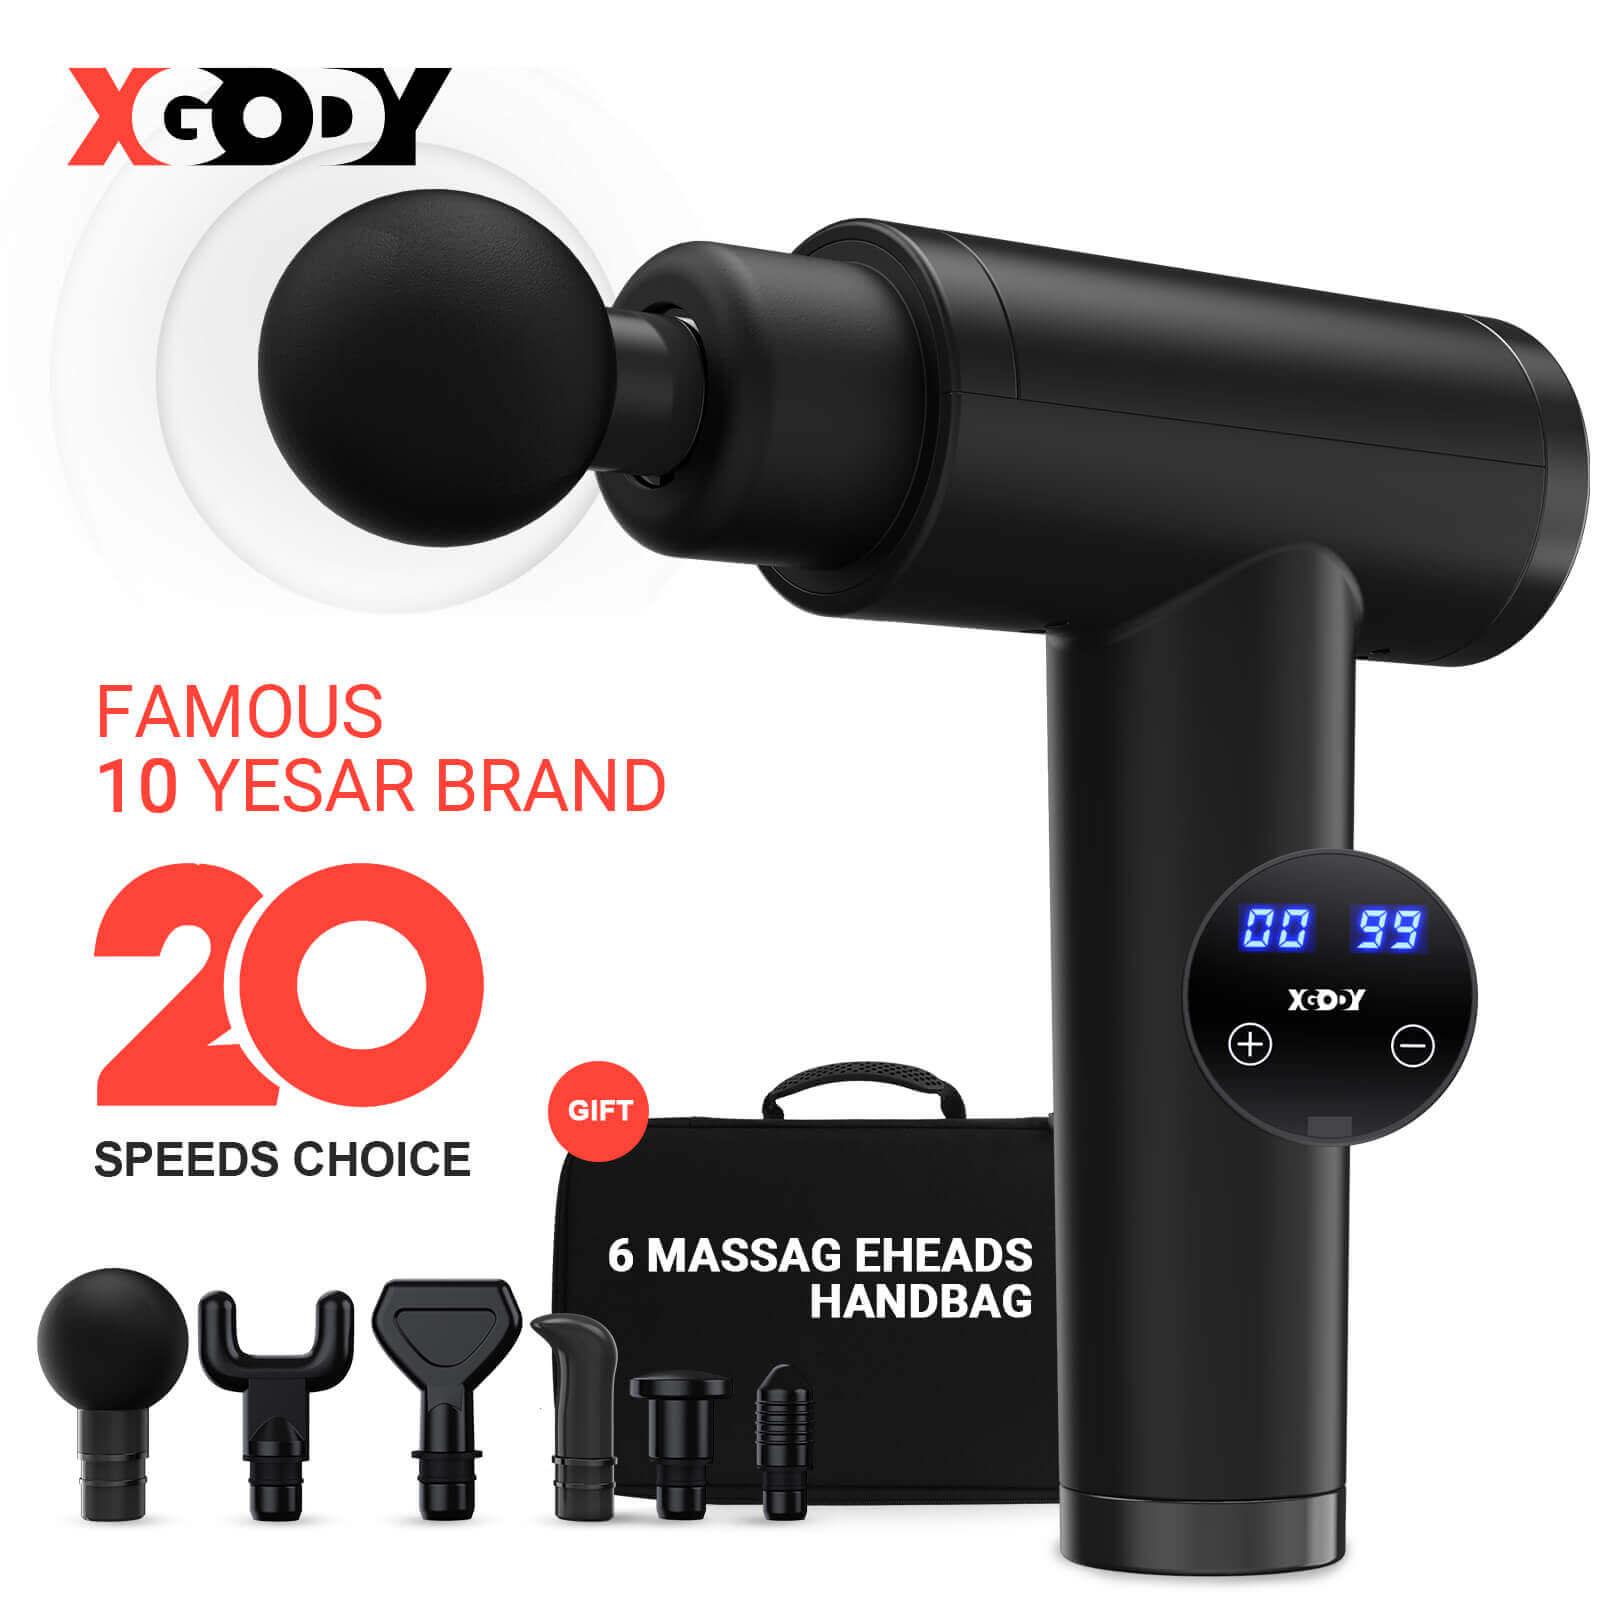 Cost-effective and Most worthwhile XGODY YZ02 Muscle Massage Gun Deep Tissue Massager For Athletes 20 Speed Percussion - XGODY 